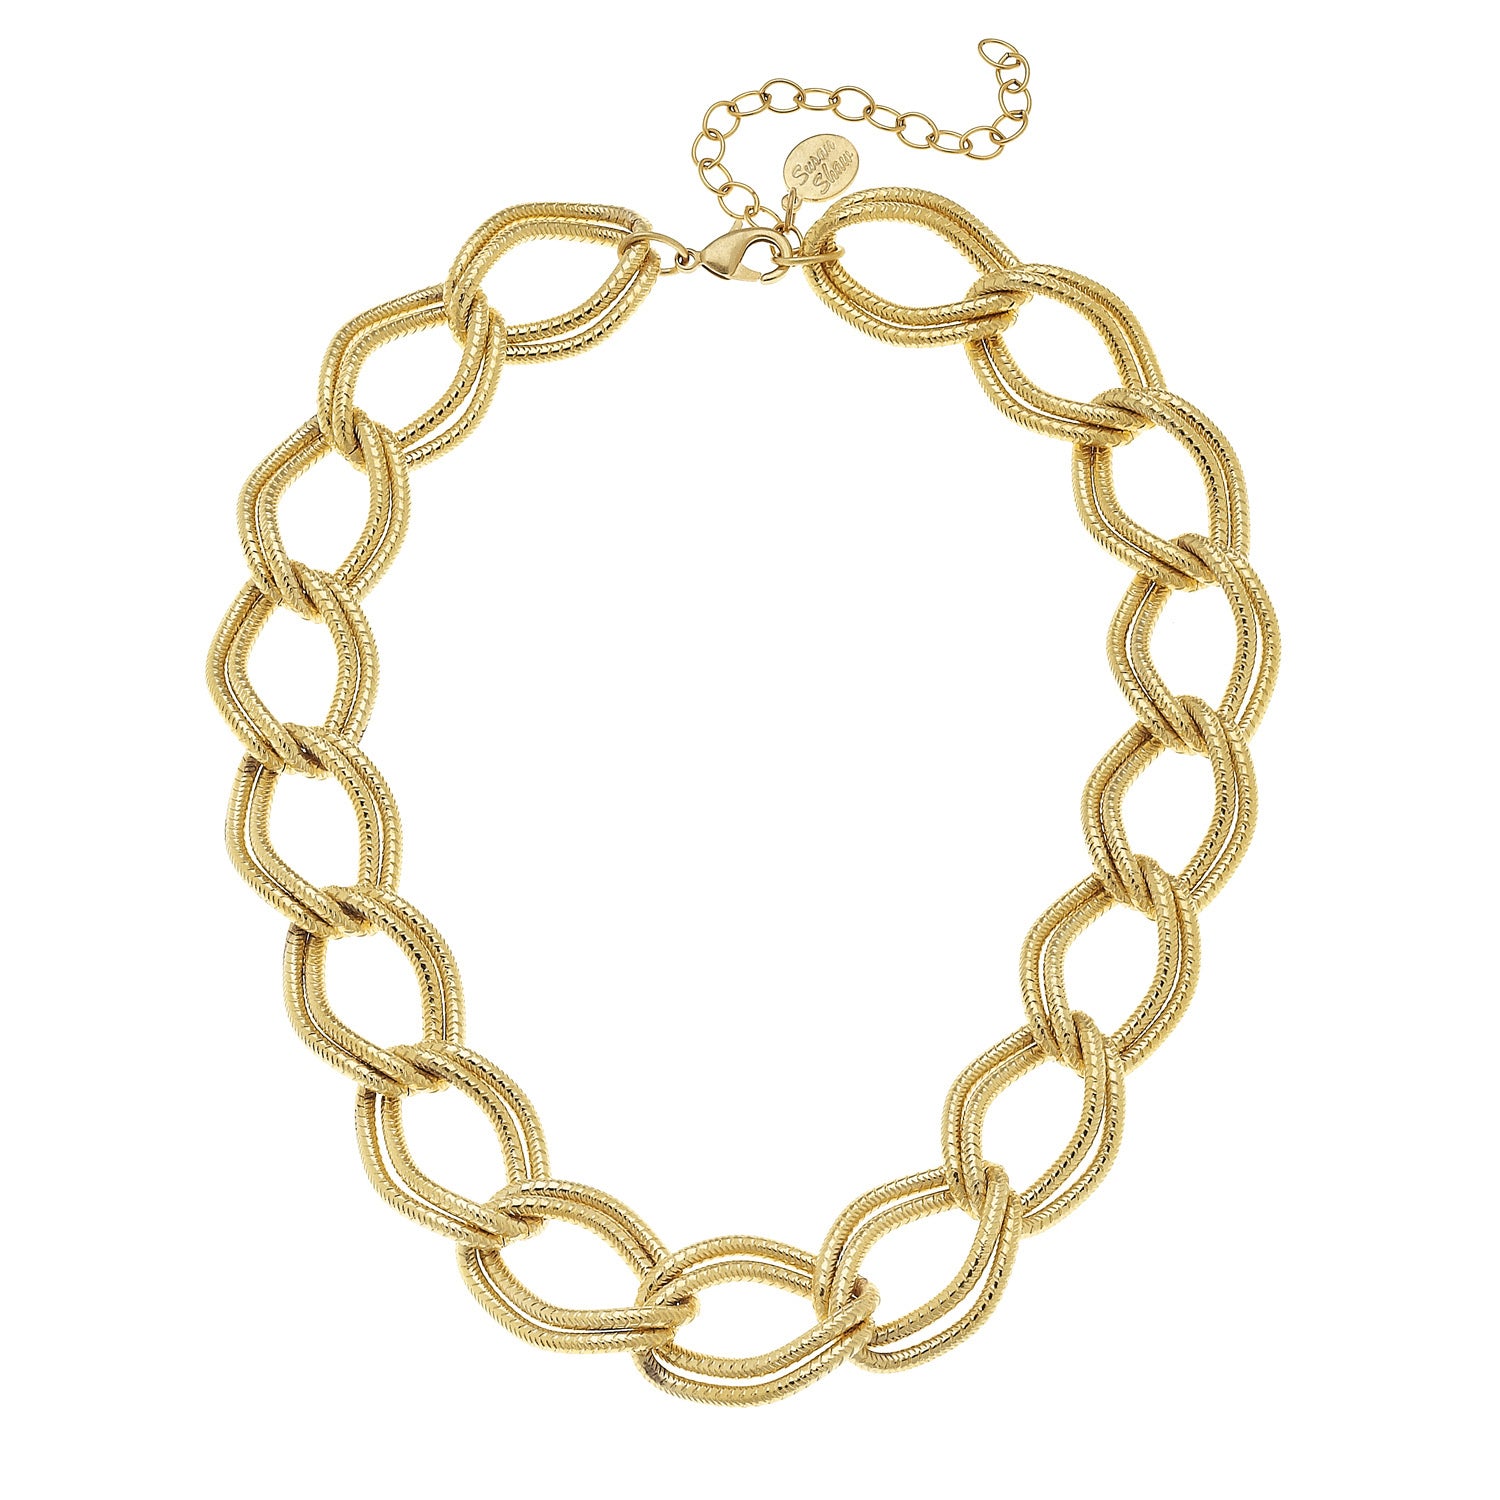 Susan Shaw Jewelry Double Chain Necklace in Gold